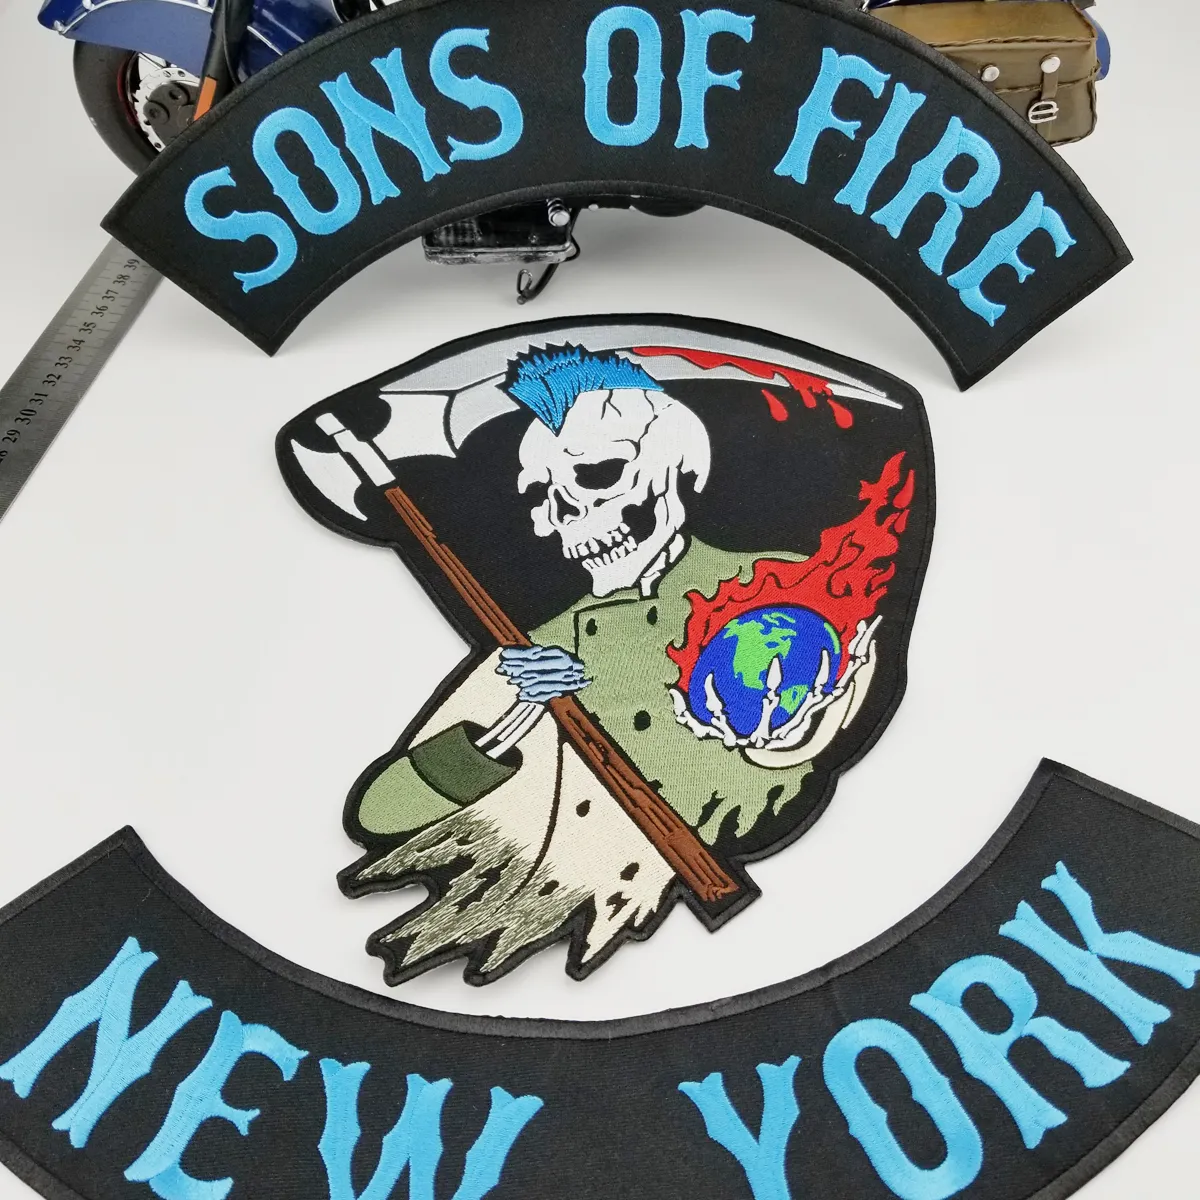 HOT SONS OF FIRE NEW YOURK SKULL MOTORCYCLE COOL LARGE BACK PATCH ROCKER CLUB VESTOUTLAW BIKER MC PATCH 